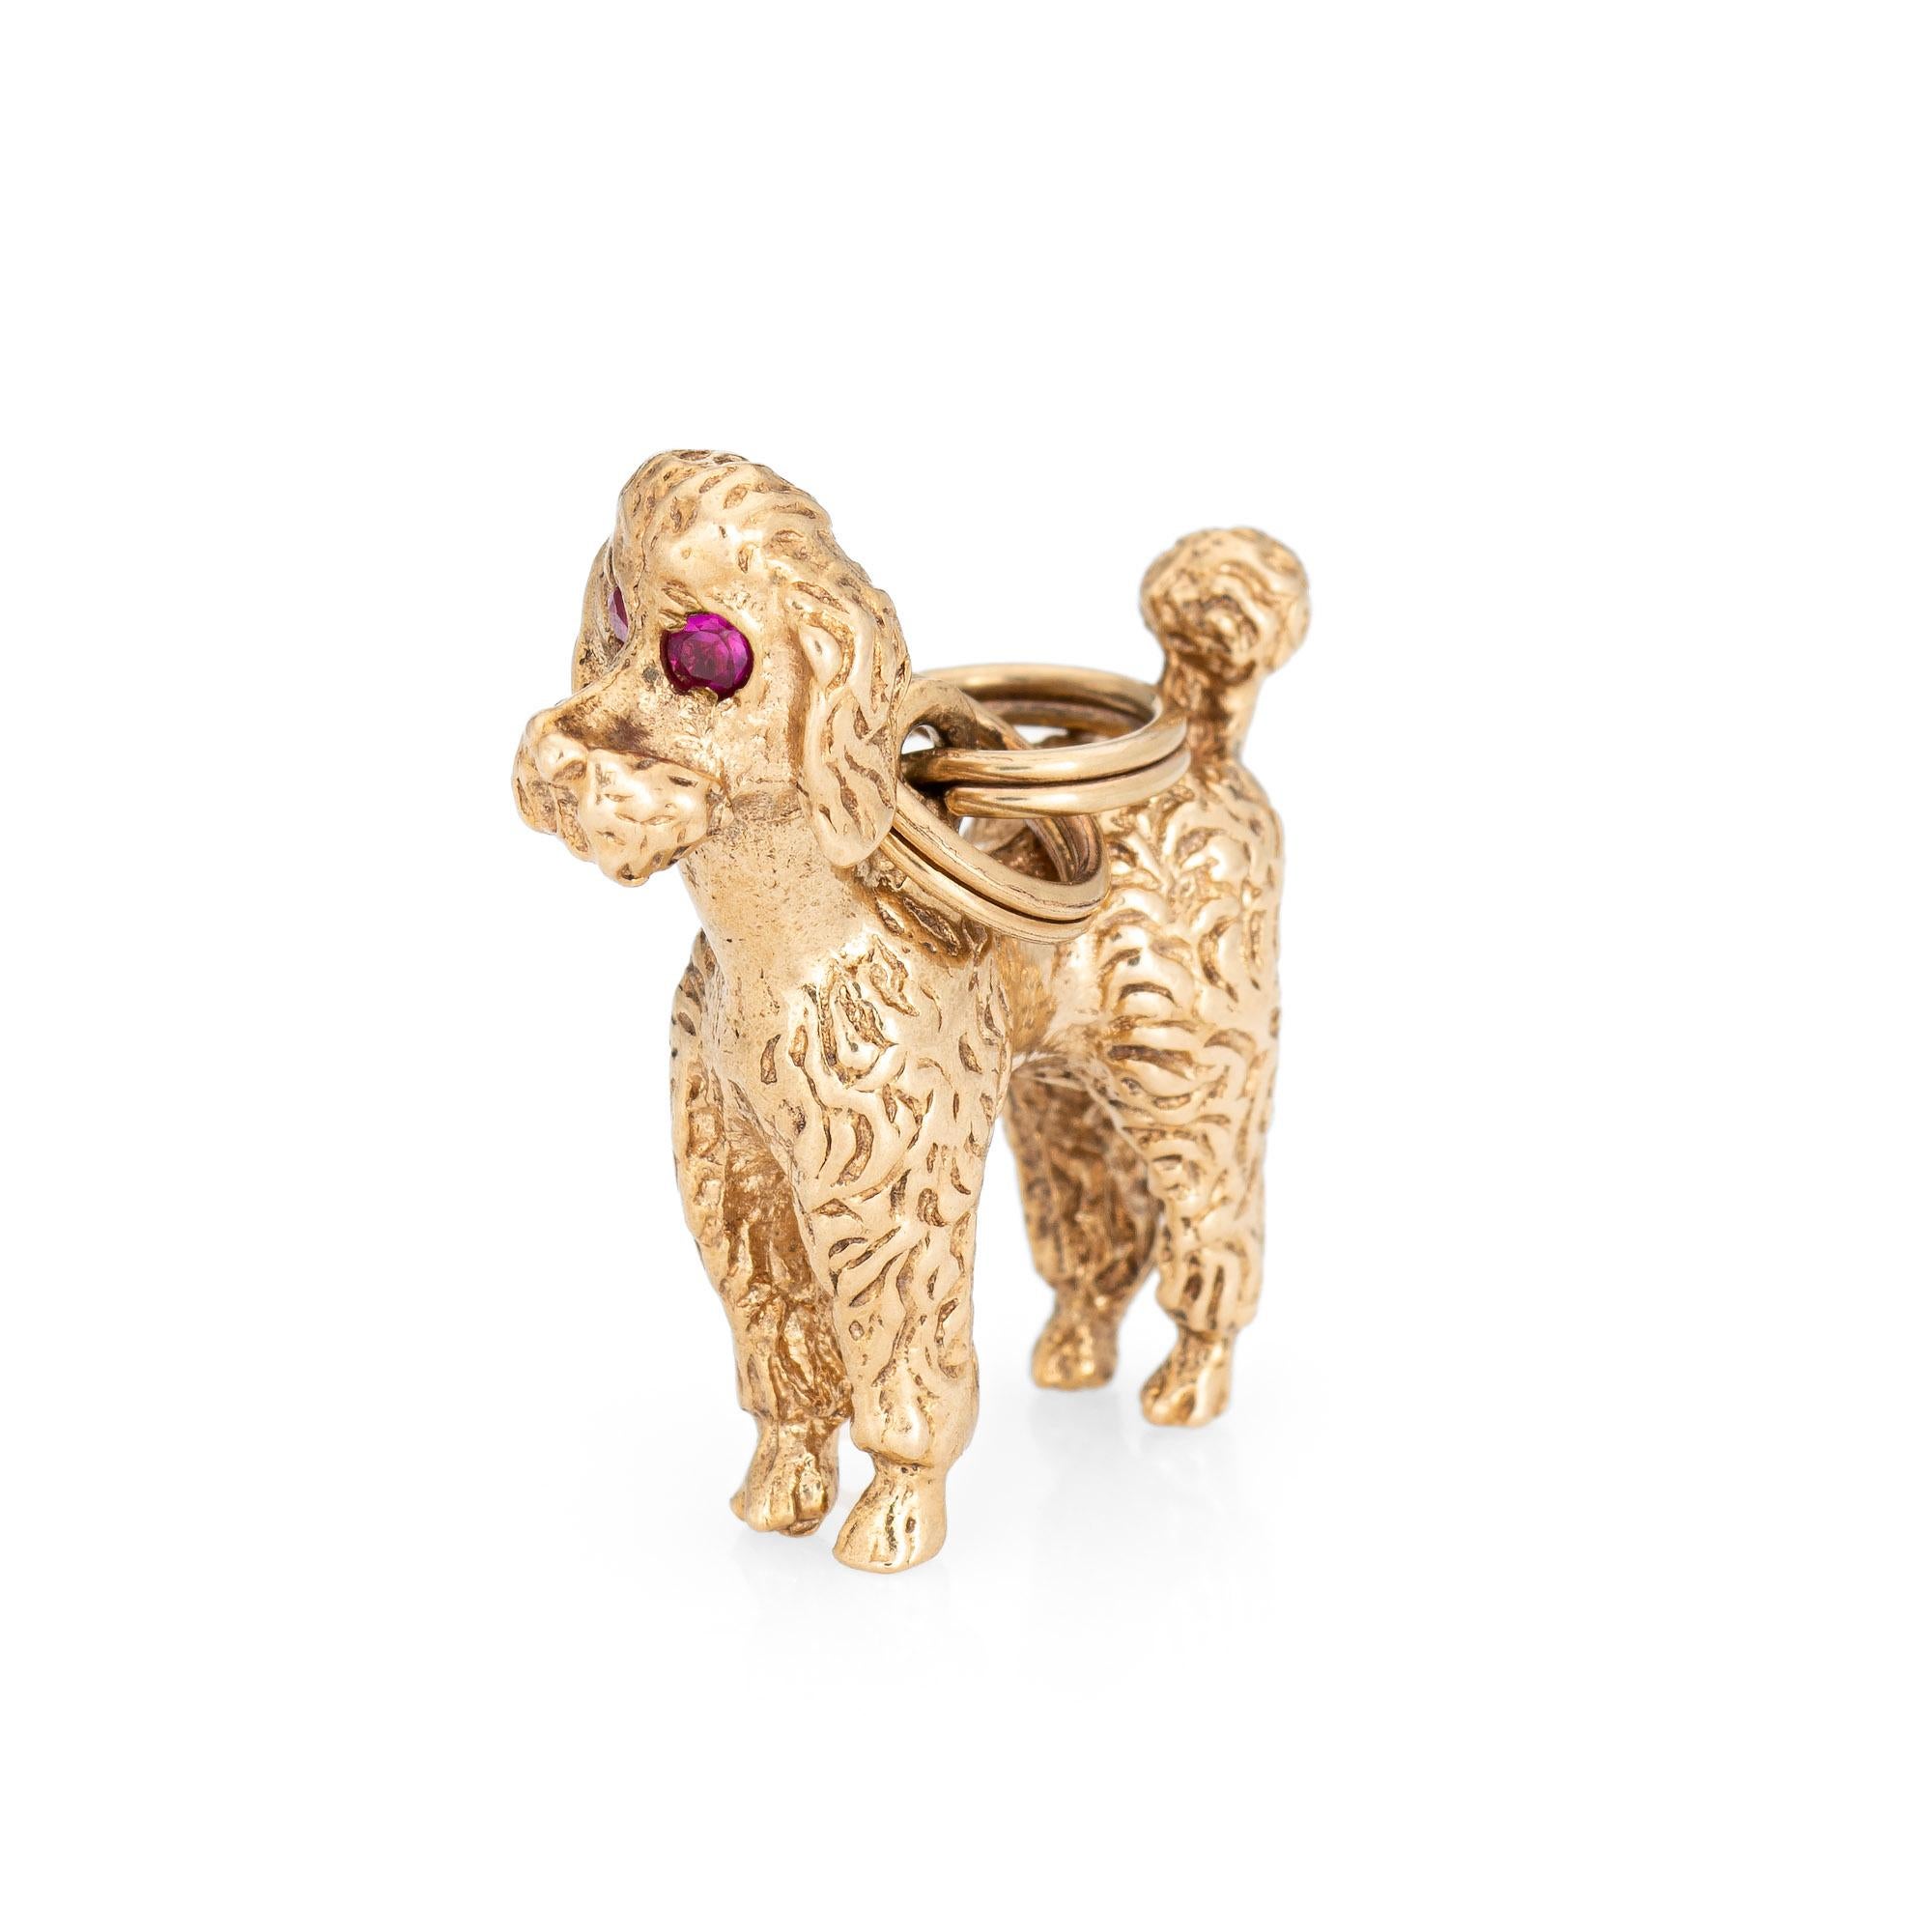 Finely detailed vintage toy poodle charm crafted in 14k yellow gold (circa 1980s to 1990s).  

The finely detailed toy poodle features a textured coat and red stone set eyes. Smaller in scale (3/4 inch diameter) the charm is great worn on a charm